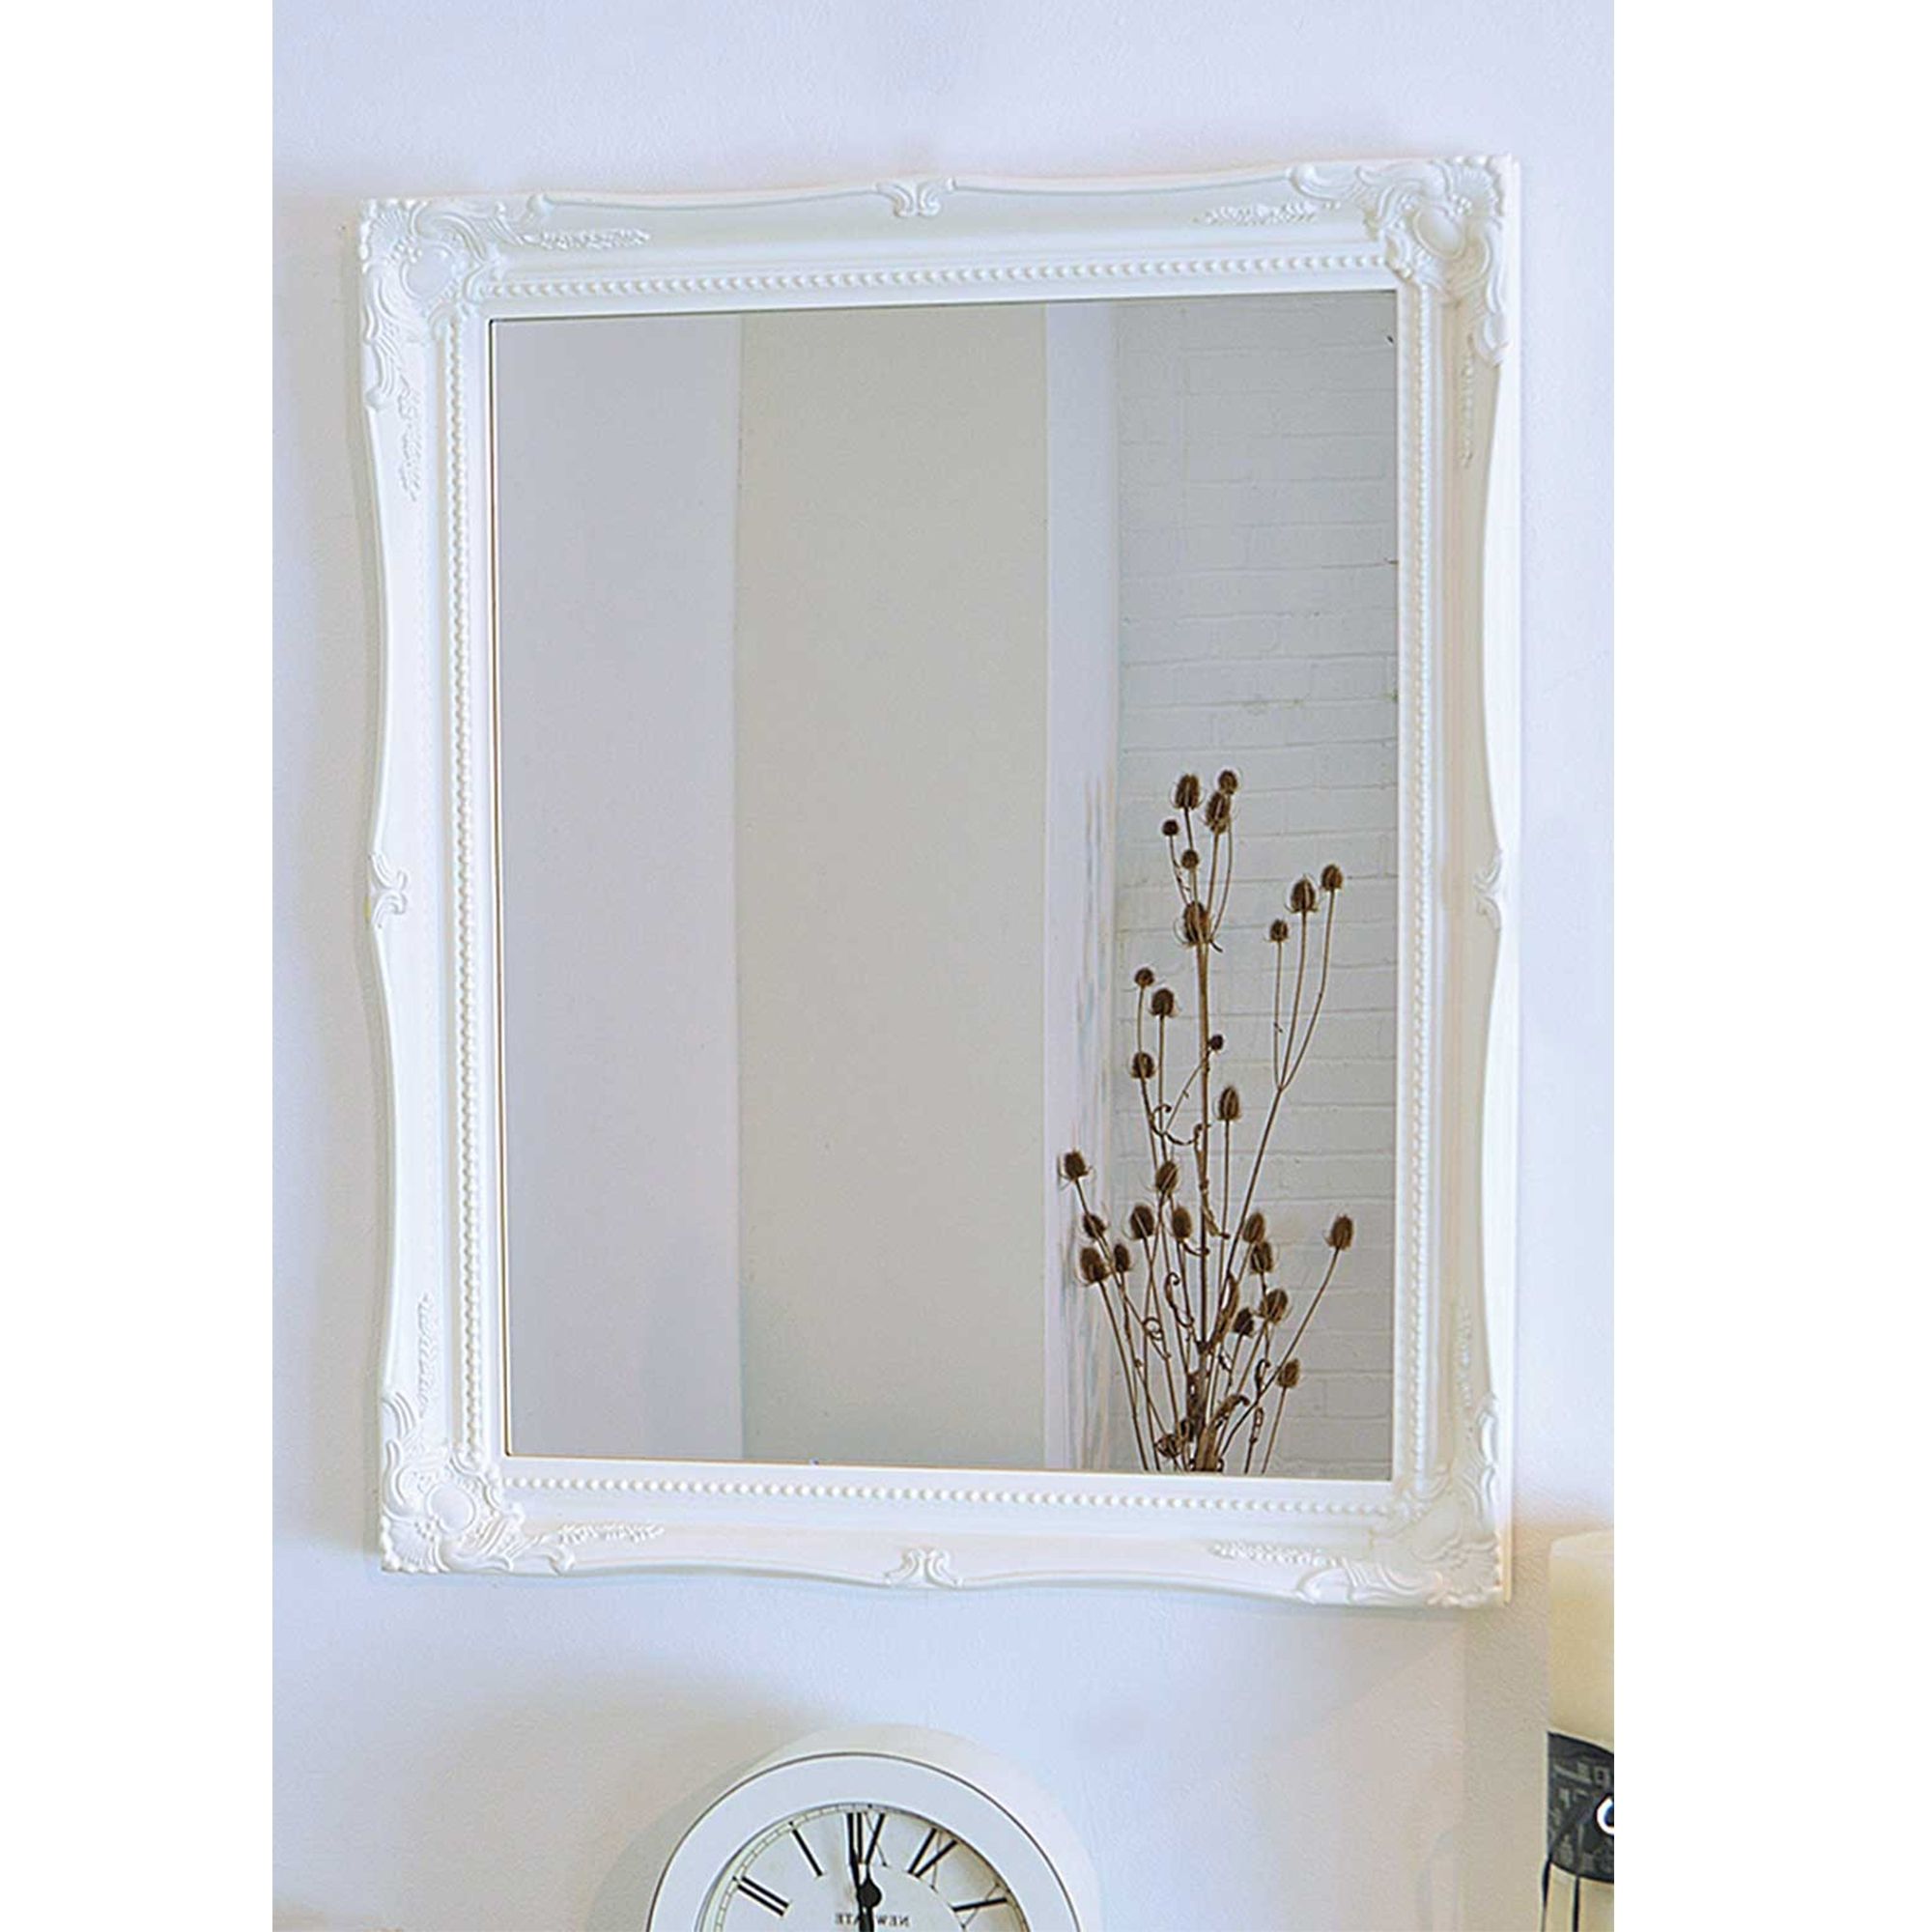 2019 Ornate Antique French Style Wall Mirror Intended For White Framed Wall Mirrors (Photo 11 of 20)